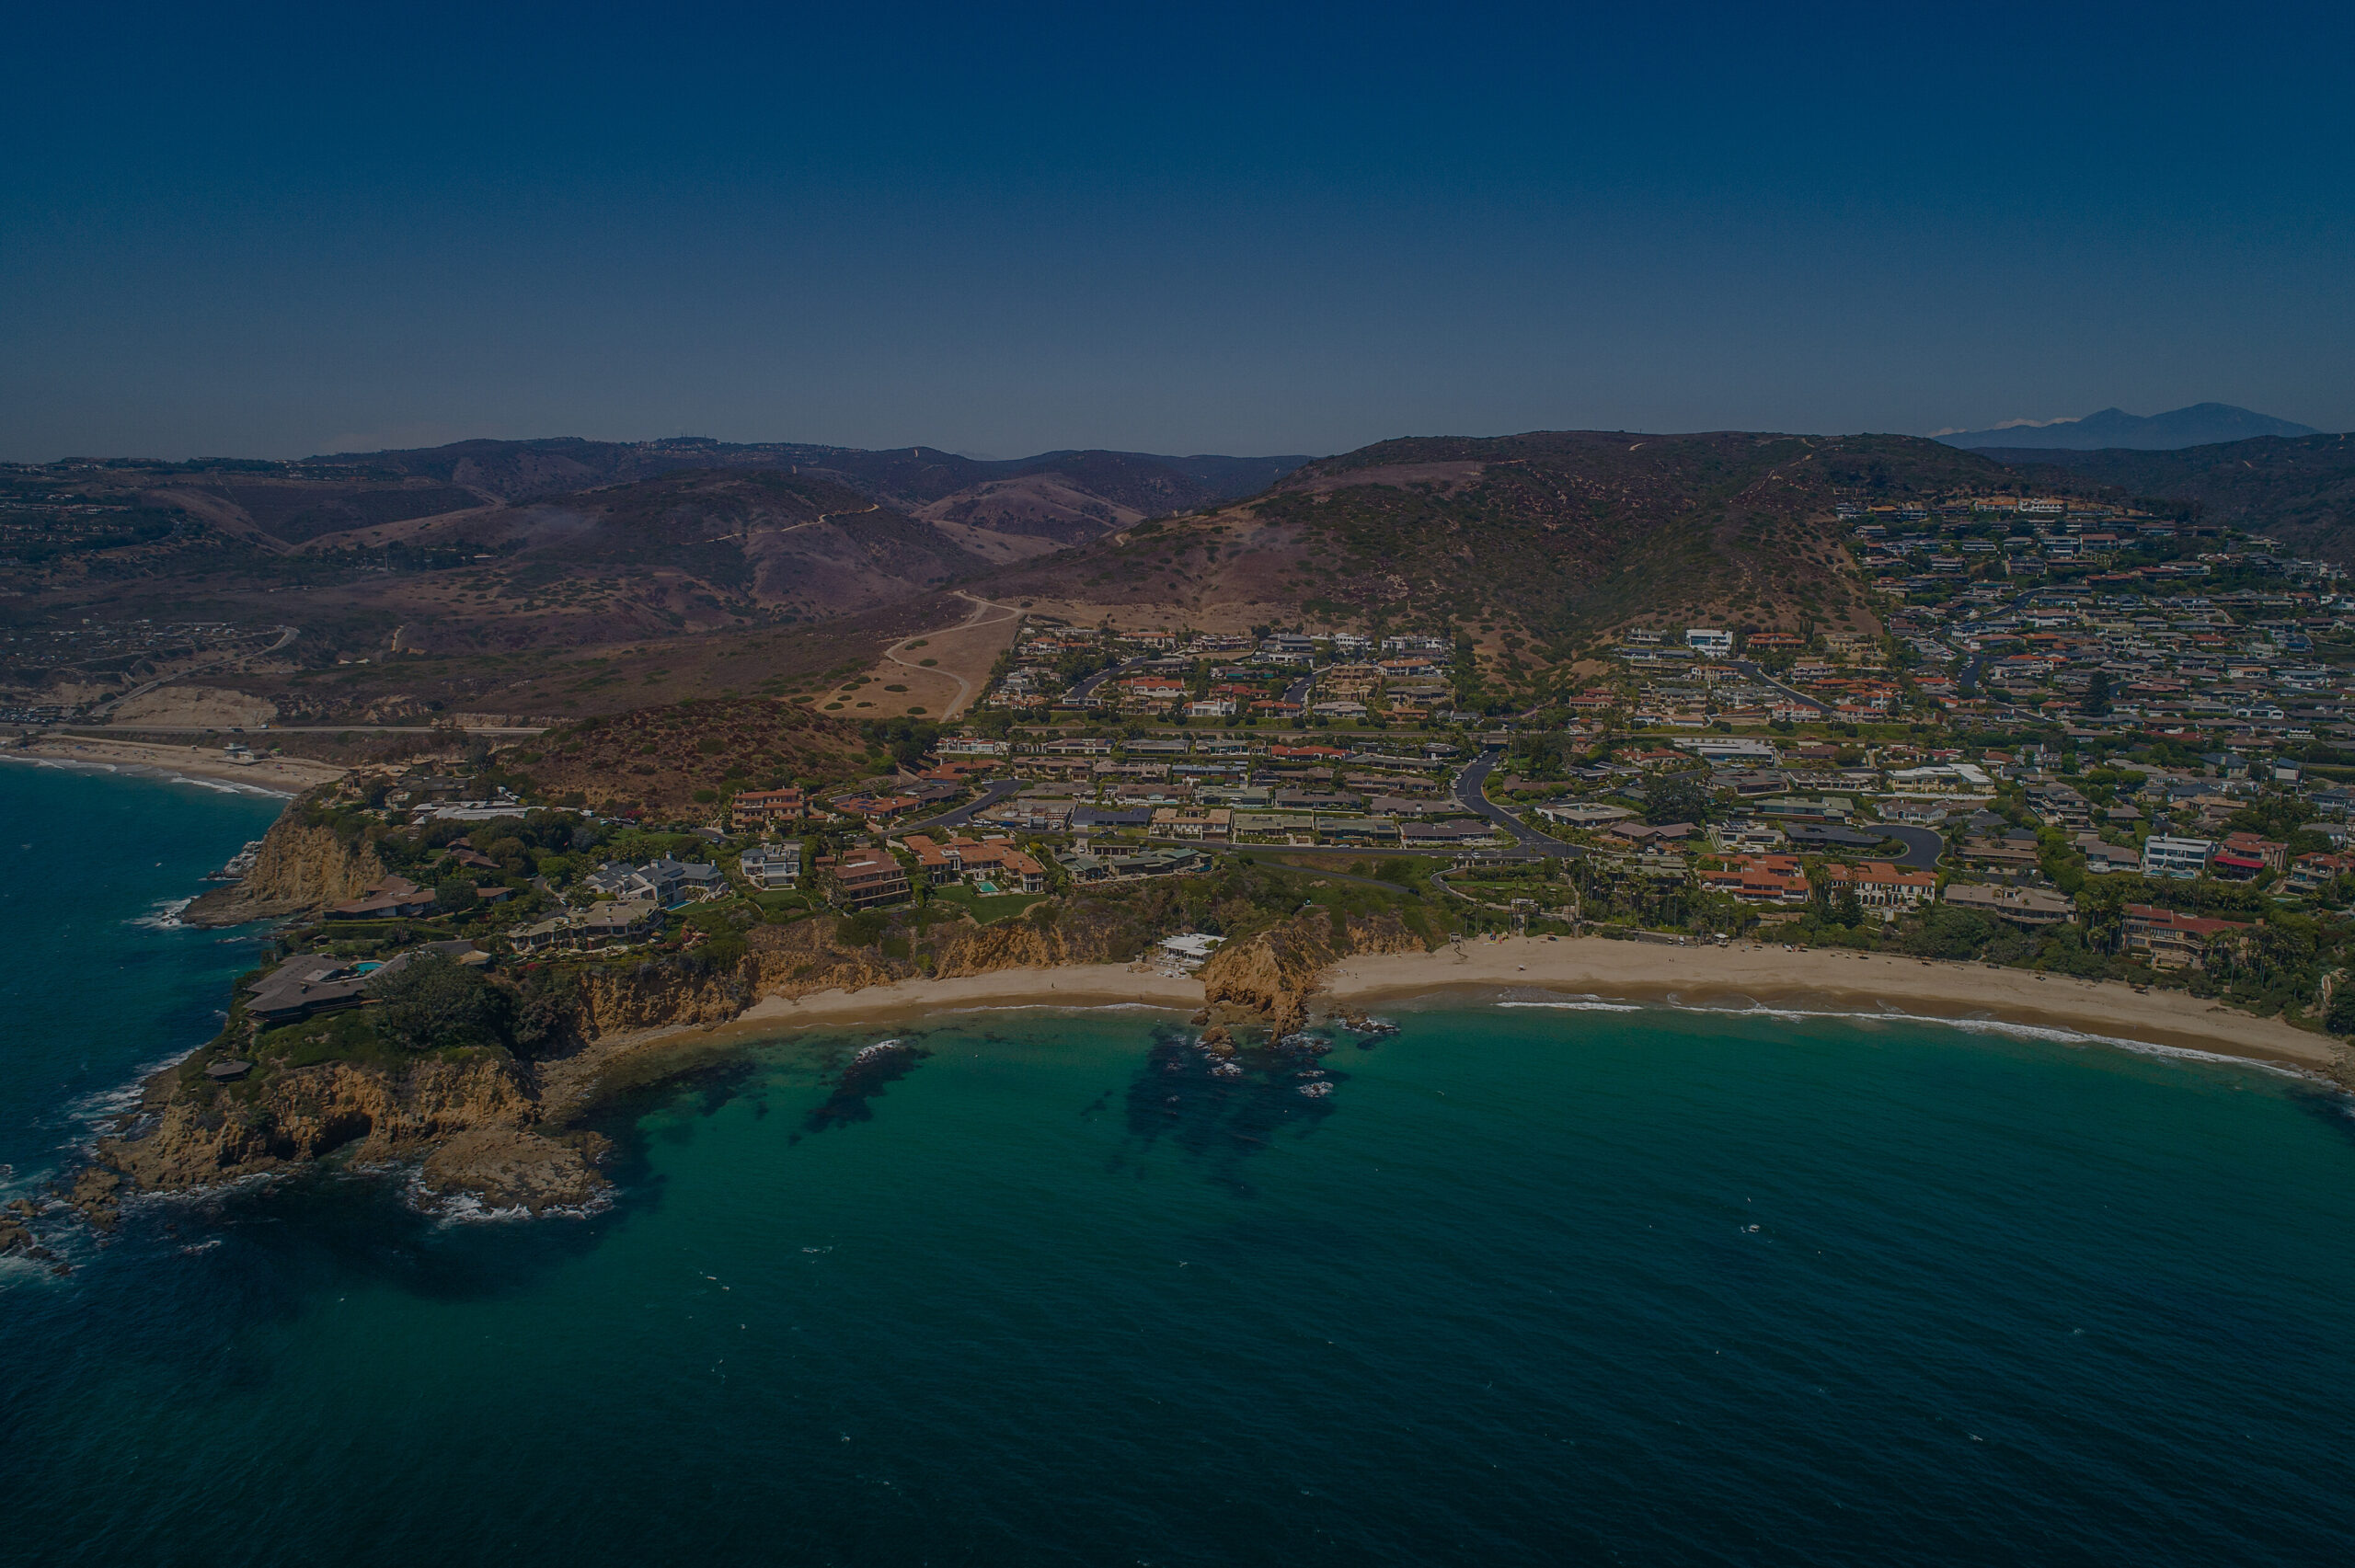 Drone view of luxury blufftop homes in Coastal Orange County overlooking the Pacific Ocean with crashing waves below, highlighting the exclusive real estate market of Newport Beach, Laguna Beach, and Corona del Mar.